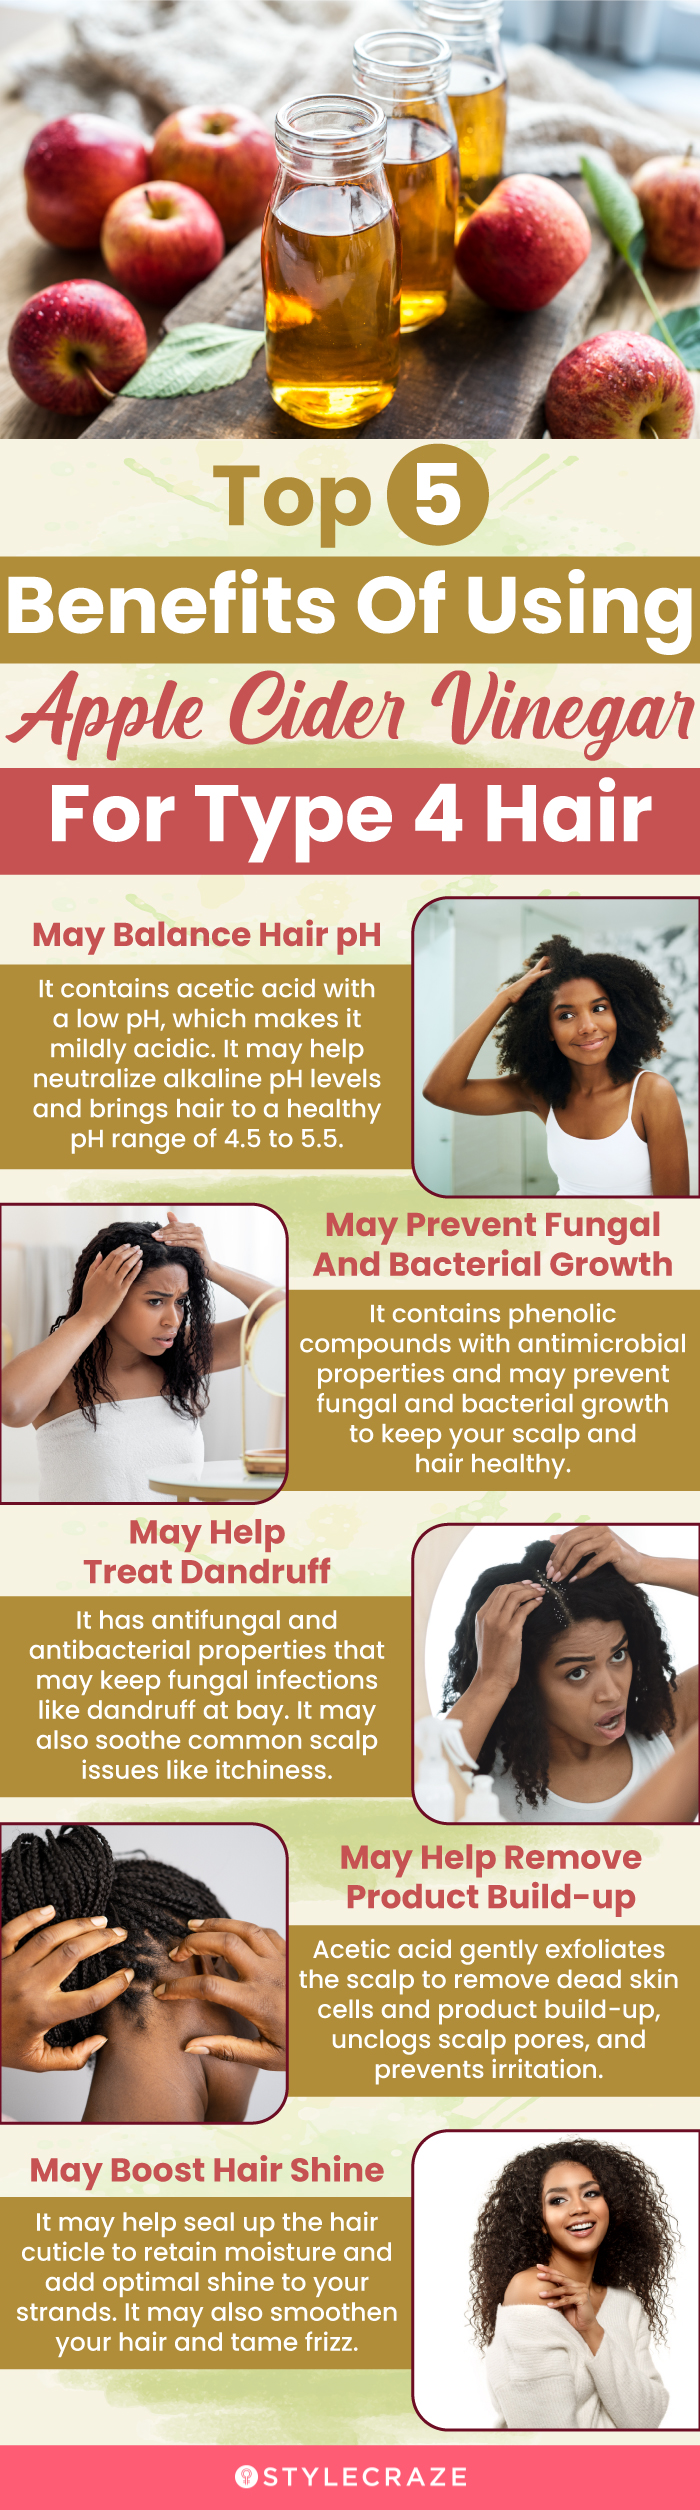 top 5 benefits of using apple cider vinegar for type 4 hair (infographic)